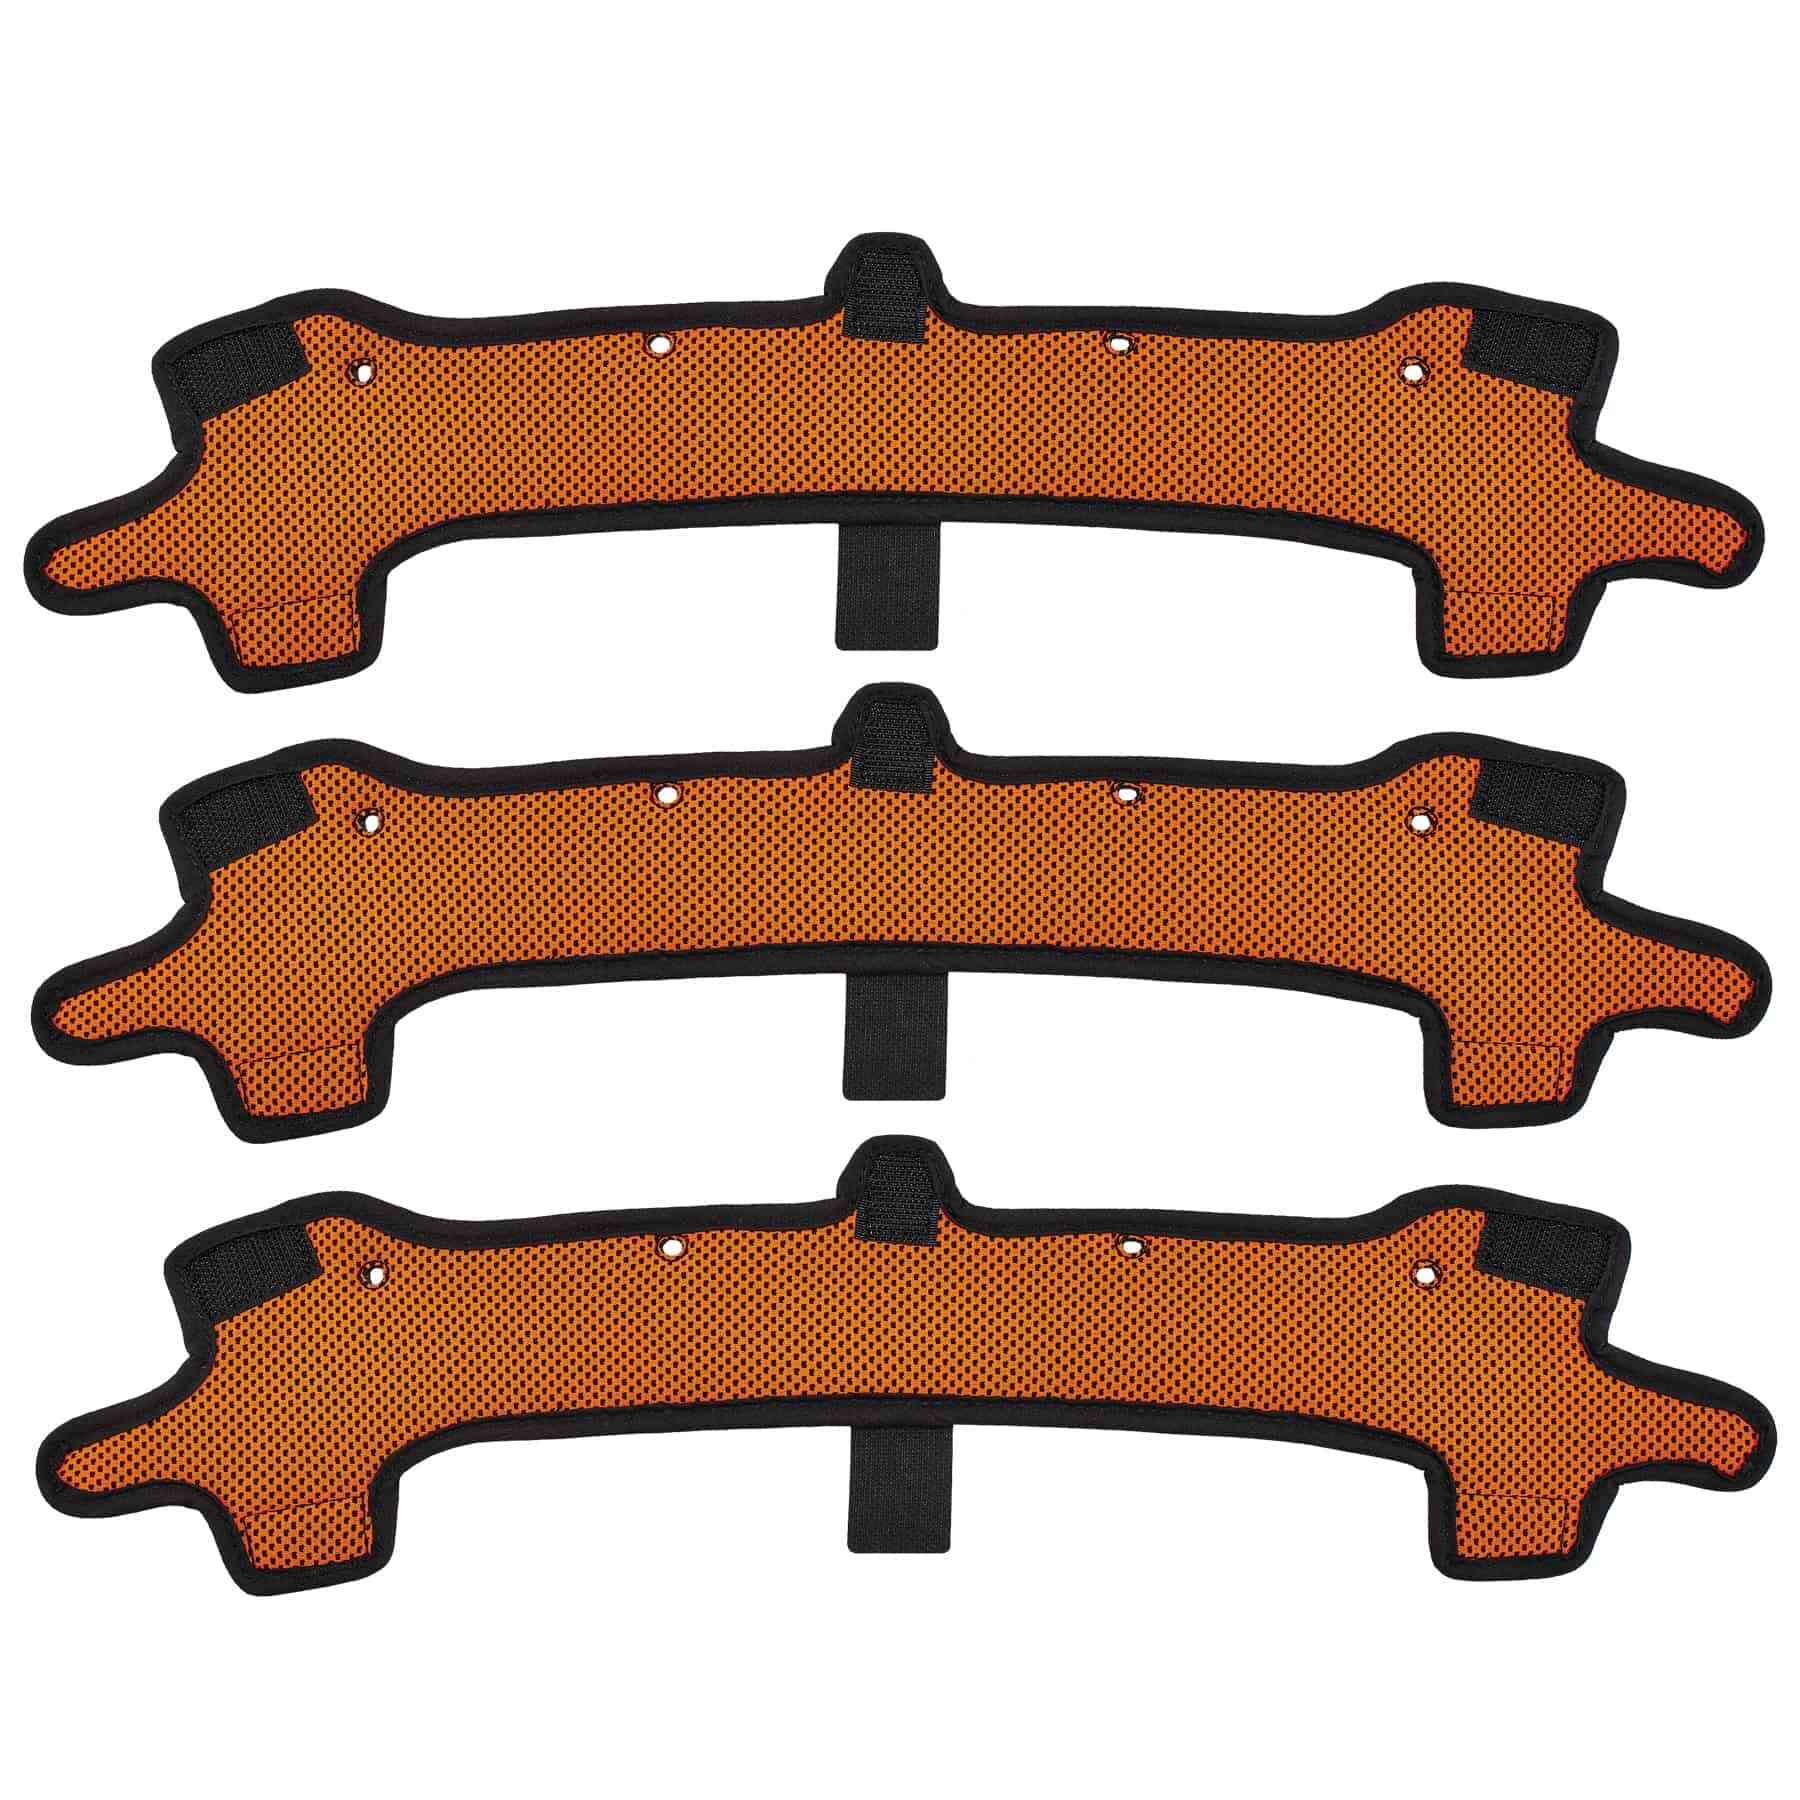 https://www.ergodyne.com/sites/default/files/product-images/60194-8984-hard-hat-replacement-sweatband-3-pack.jpg